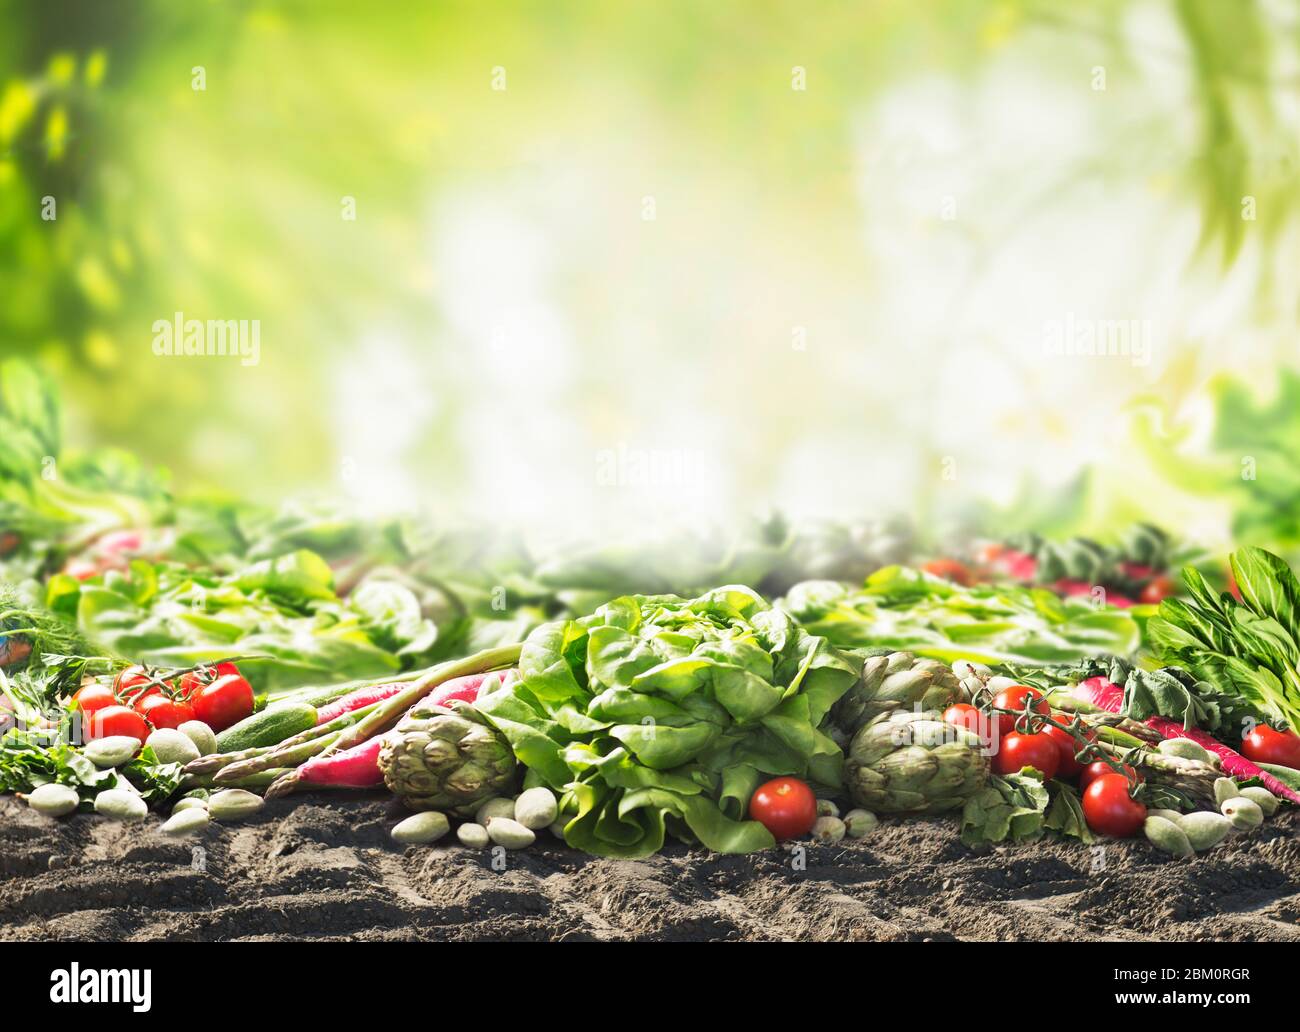 Group of various harvesting organic vegetables on soil at sunny summer  garden green nature background. Veggies growing. Eco food.  Tomato, lettuce, r Stock Photo